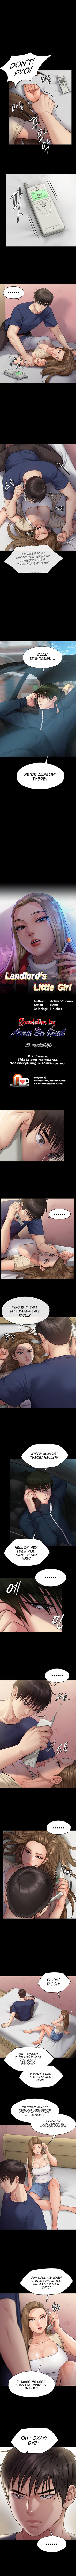 Panel Image 1 for chapter 217 of manhwa Queen Bee on read.oppai.stream